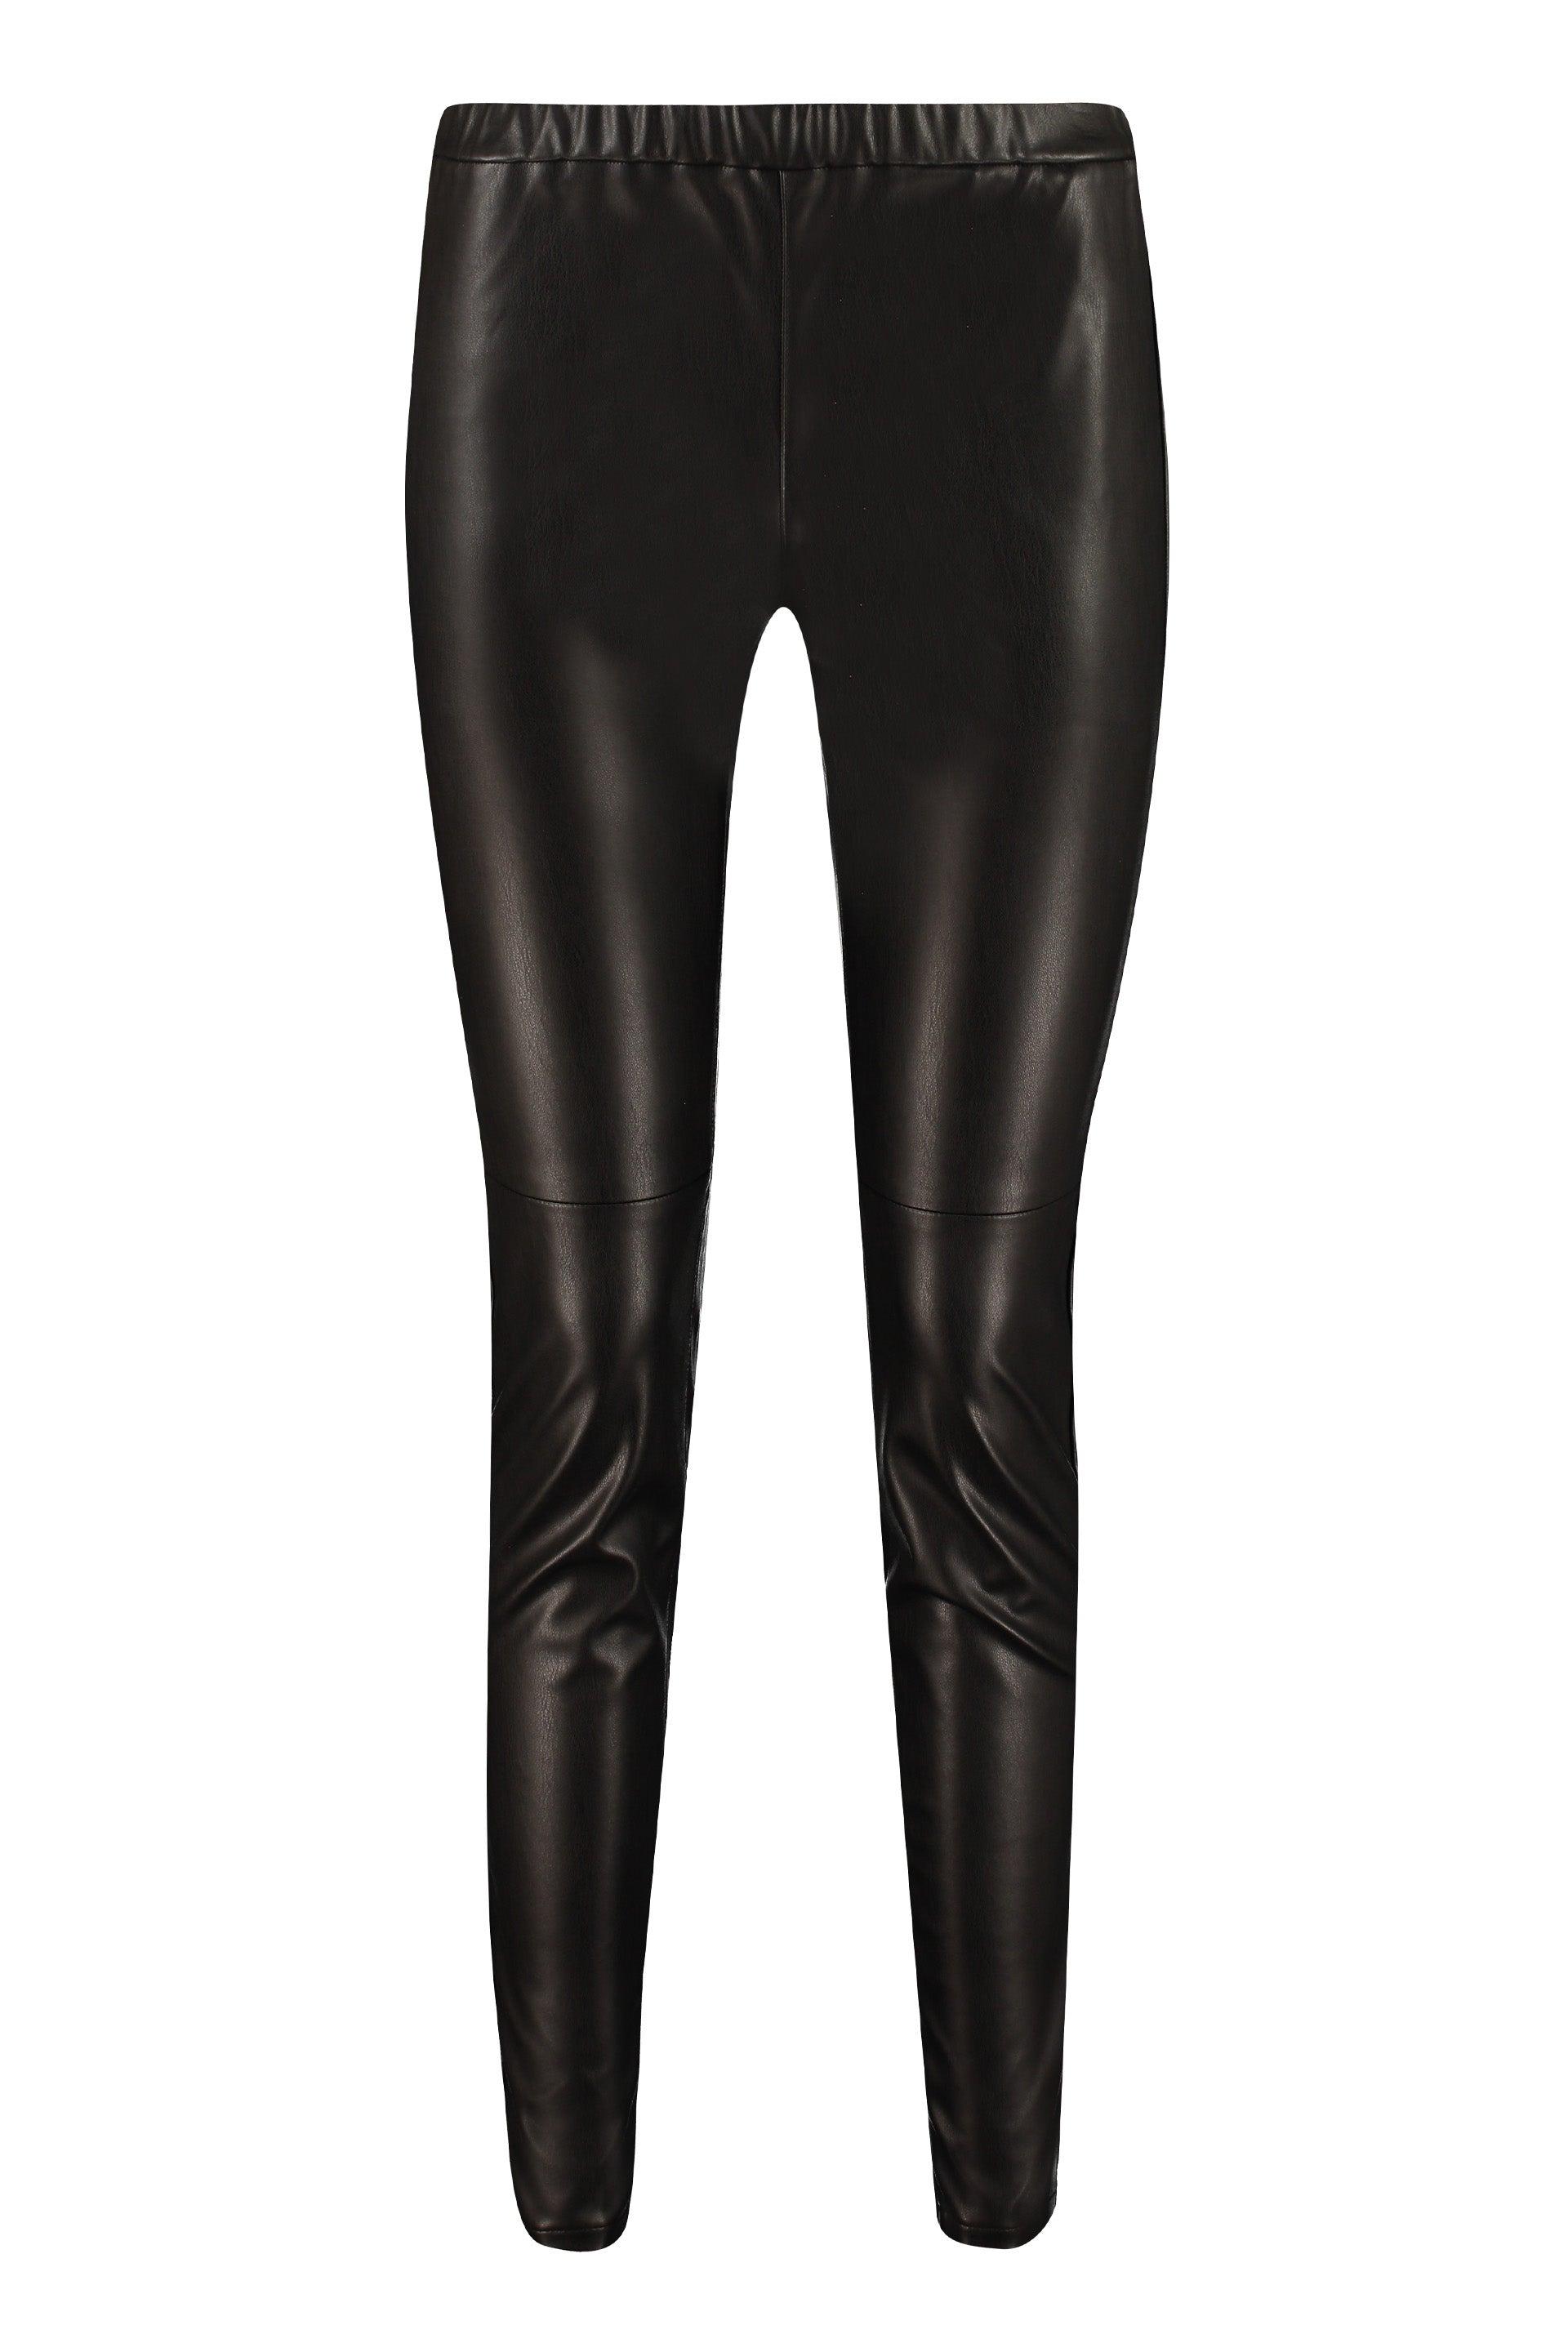 MICHAEL Michael Kors Faux Leather Trousers in Black